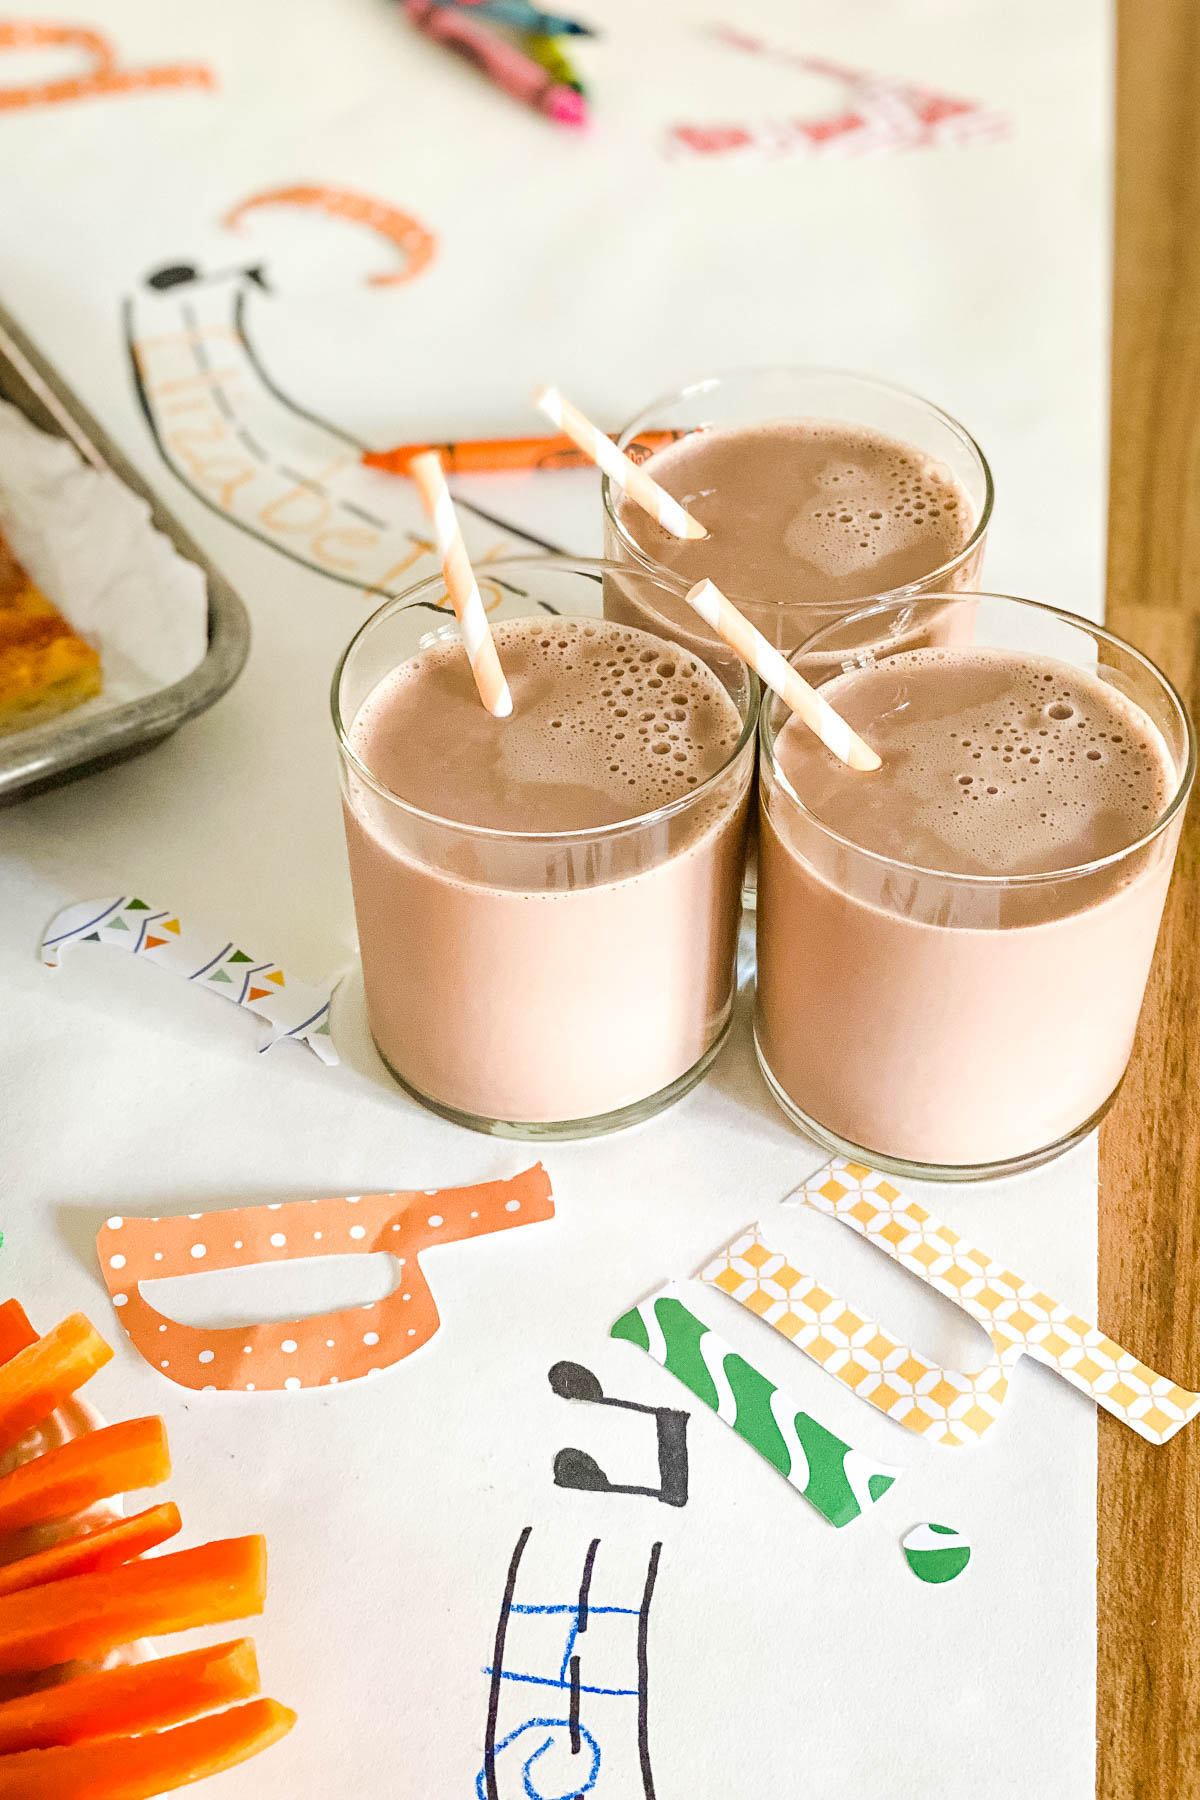 Three short glasses of chocolate milk are in focus in the foreground. They are set on a white paper table runner decorated with colorful paper letters.